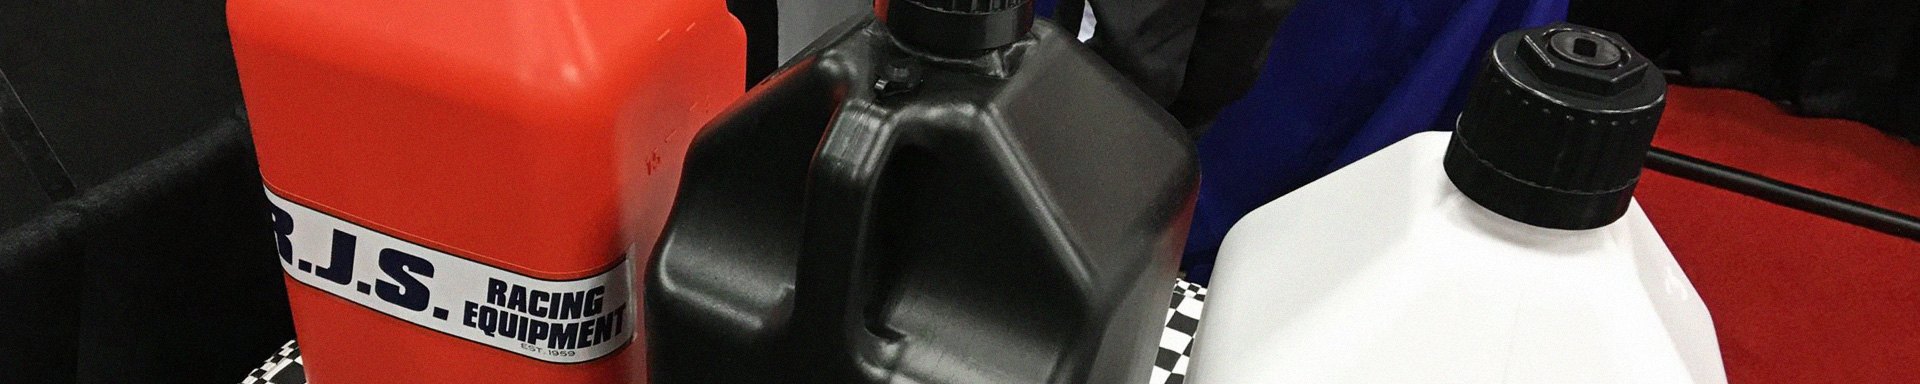 Motorcycle Fuel Cans